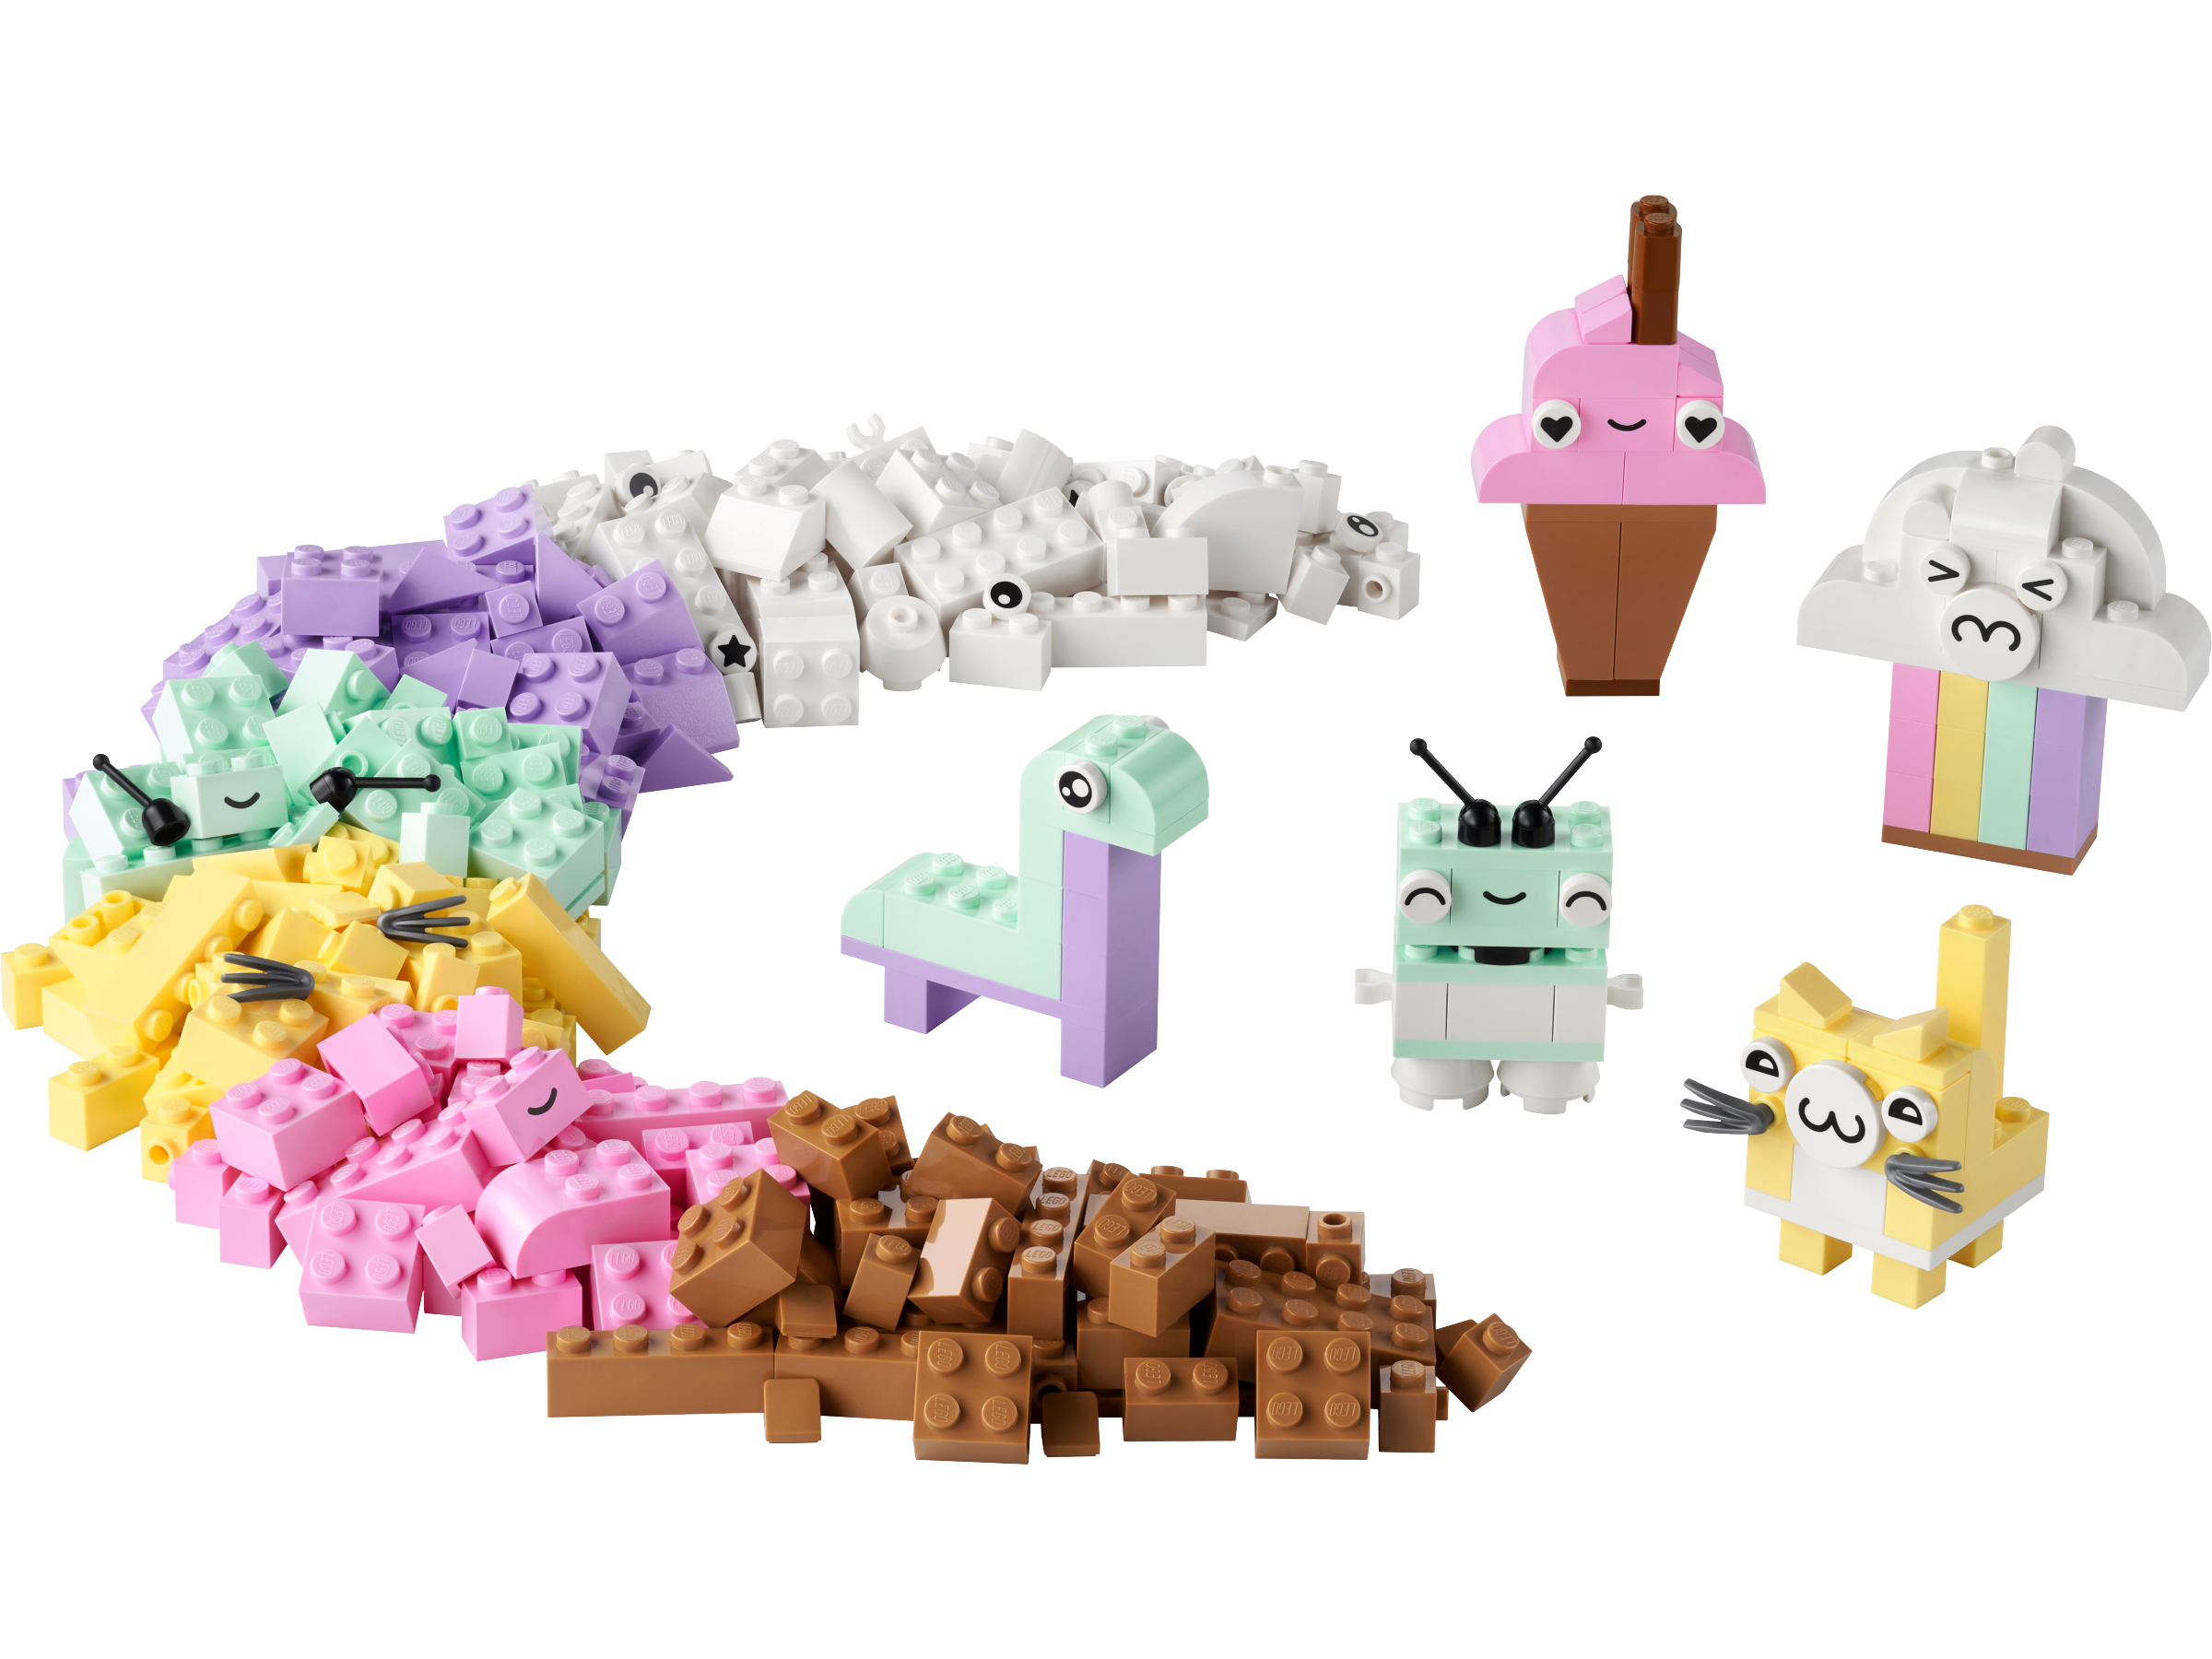 Creative Pastel Fun 11028 | Classic | Buy online at the Official LEGO® Shop  US